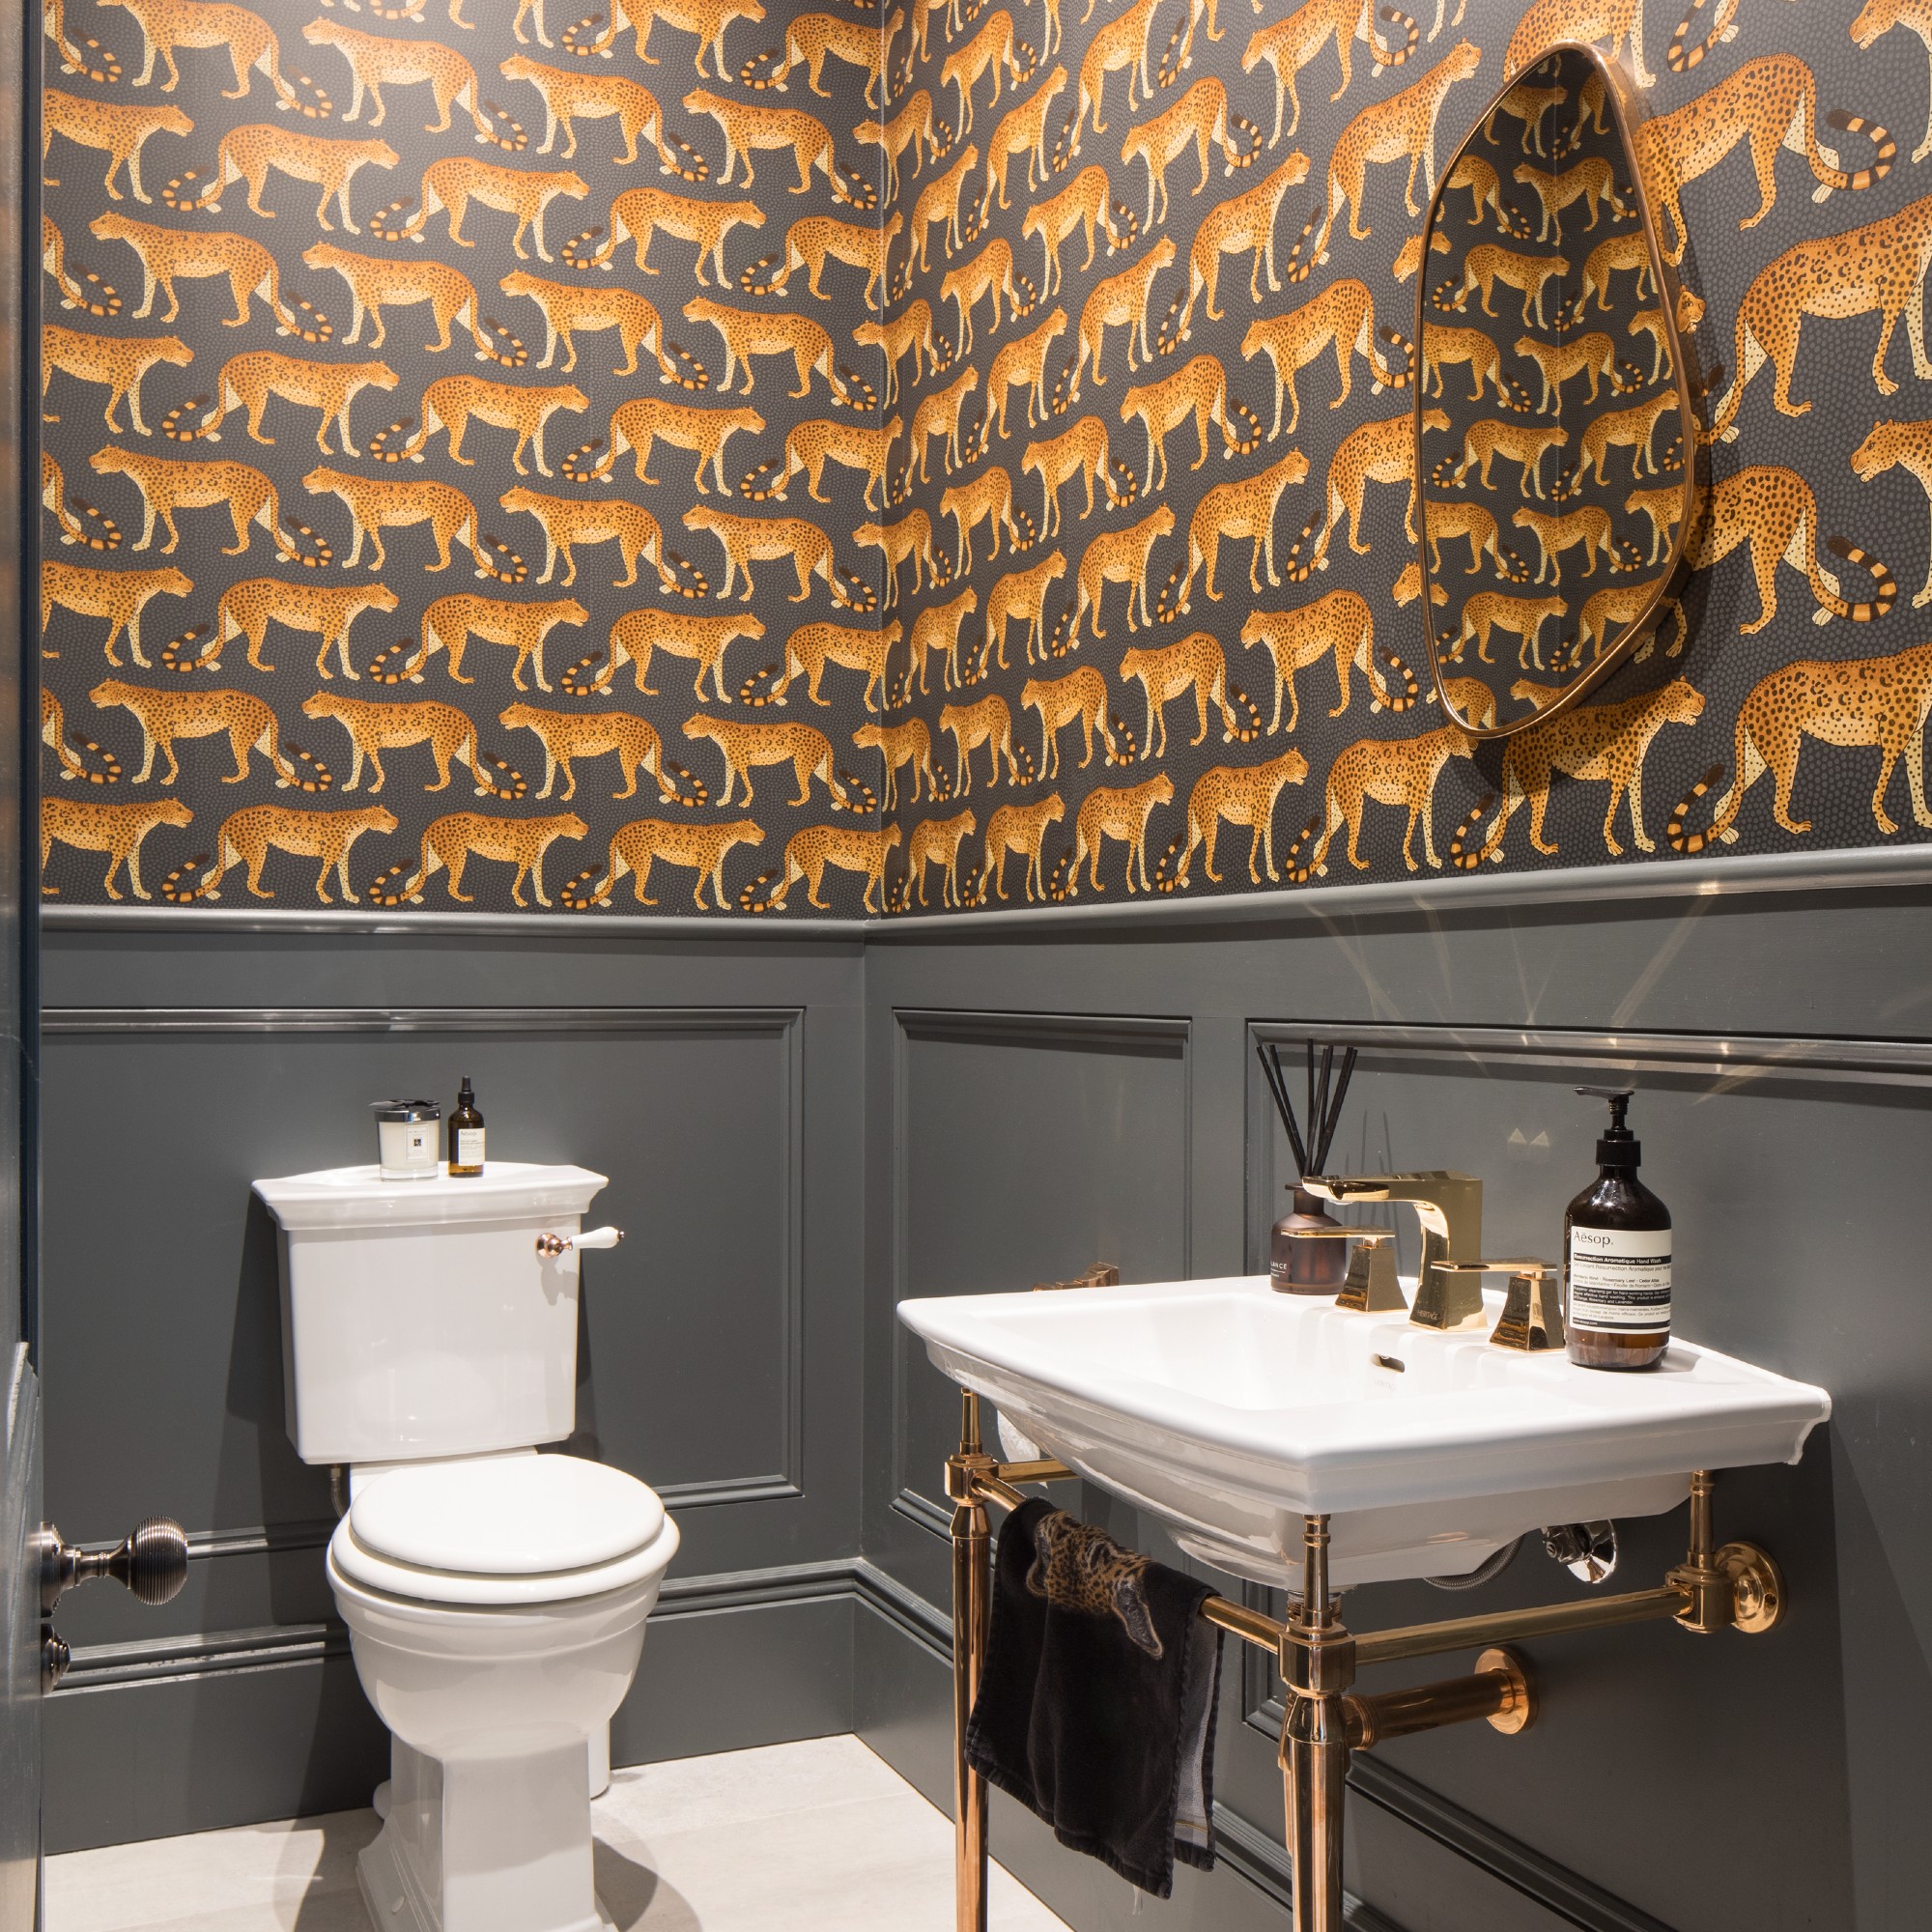 A cloakroom in charcoal grey covered in a leopard wallpaper